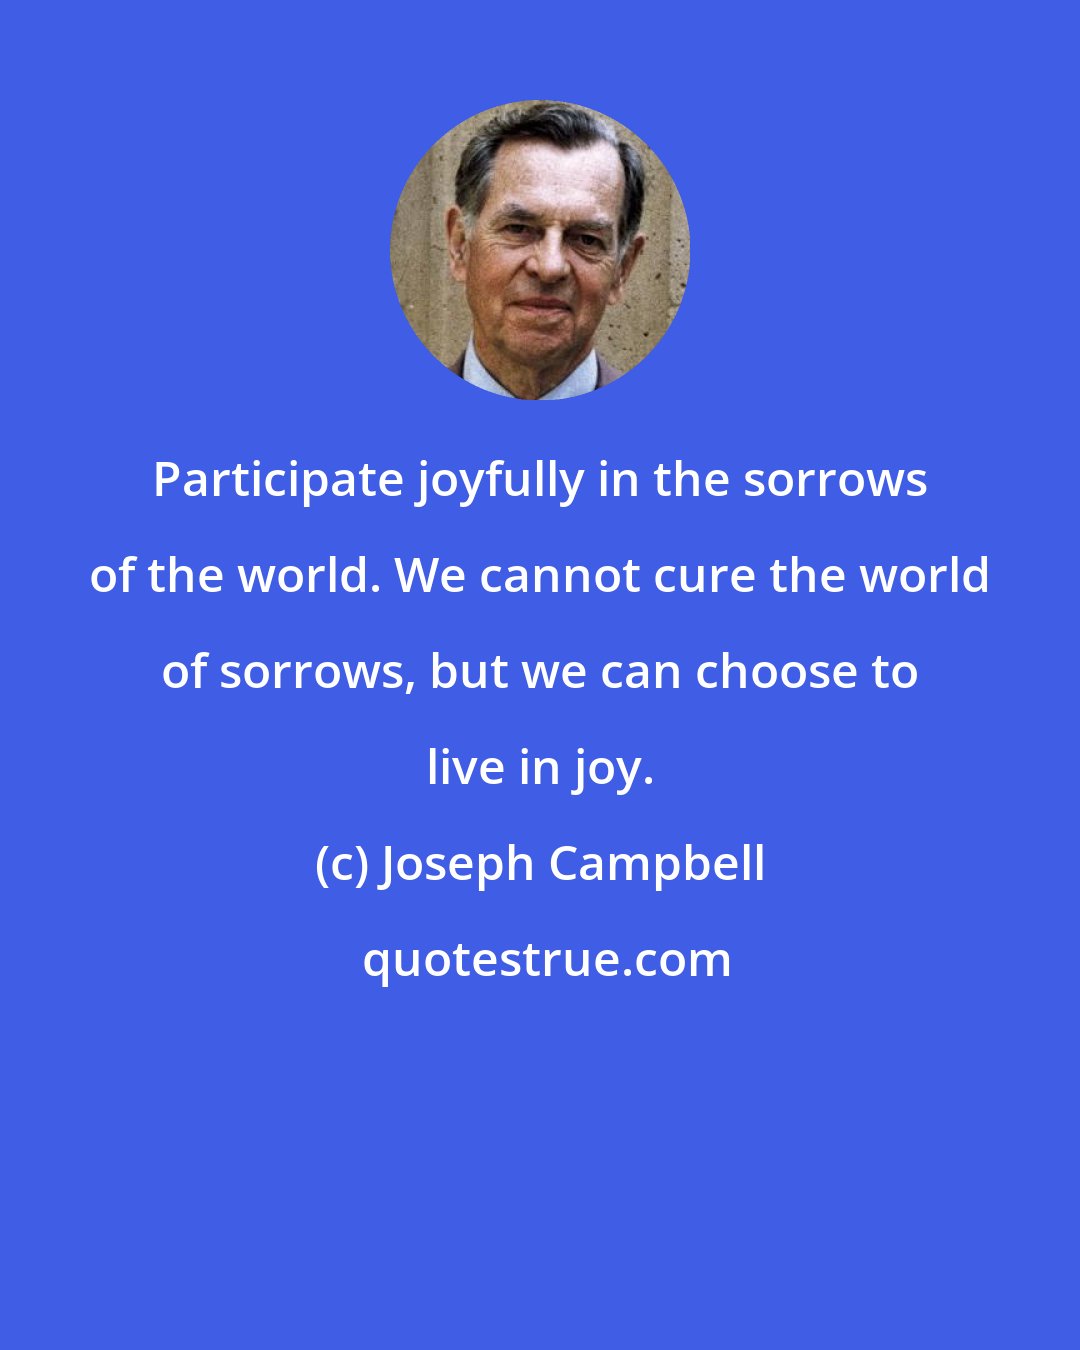 Joseph Campbell: Participate joyfully in the sorrows of the world. We cannot cure the world of sorrows, but we can choose to live in joy.